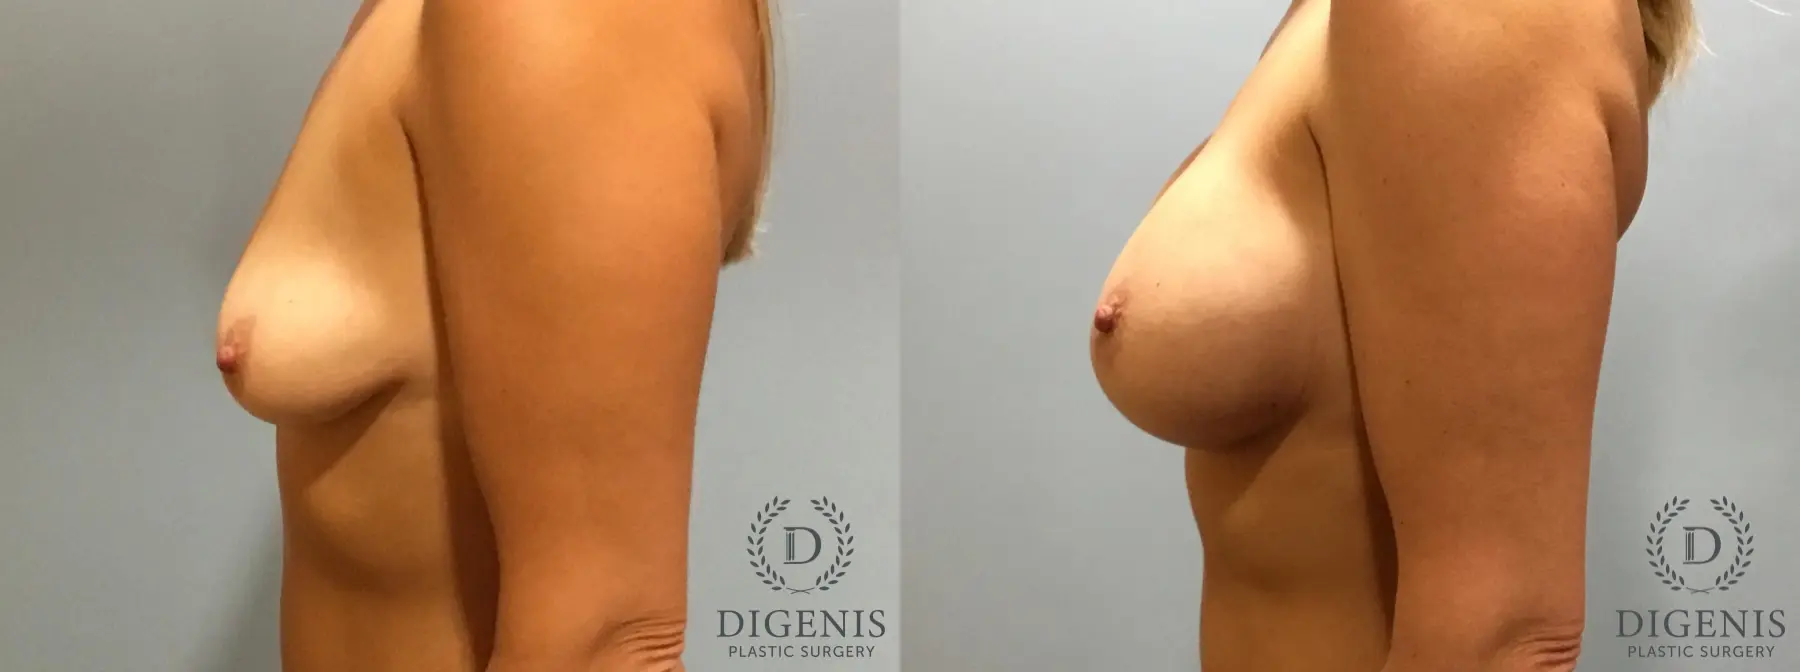 Breast Lift With Implants: Patient 5 - Before and After 5